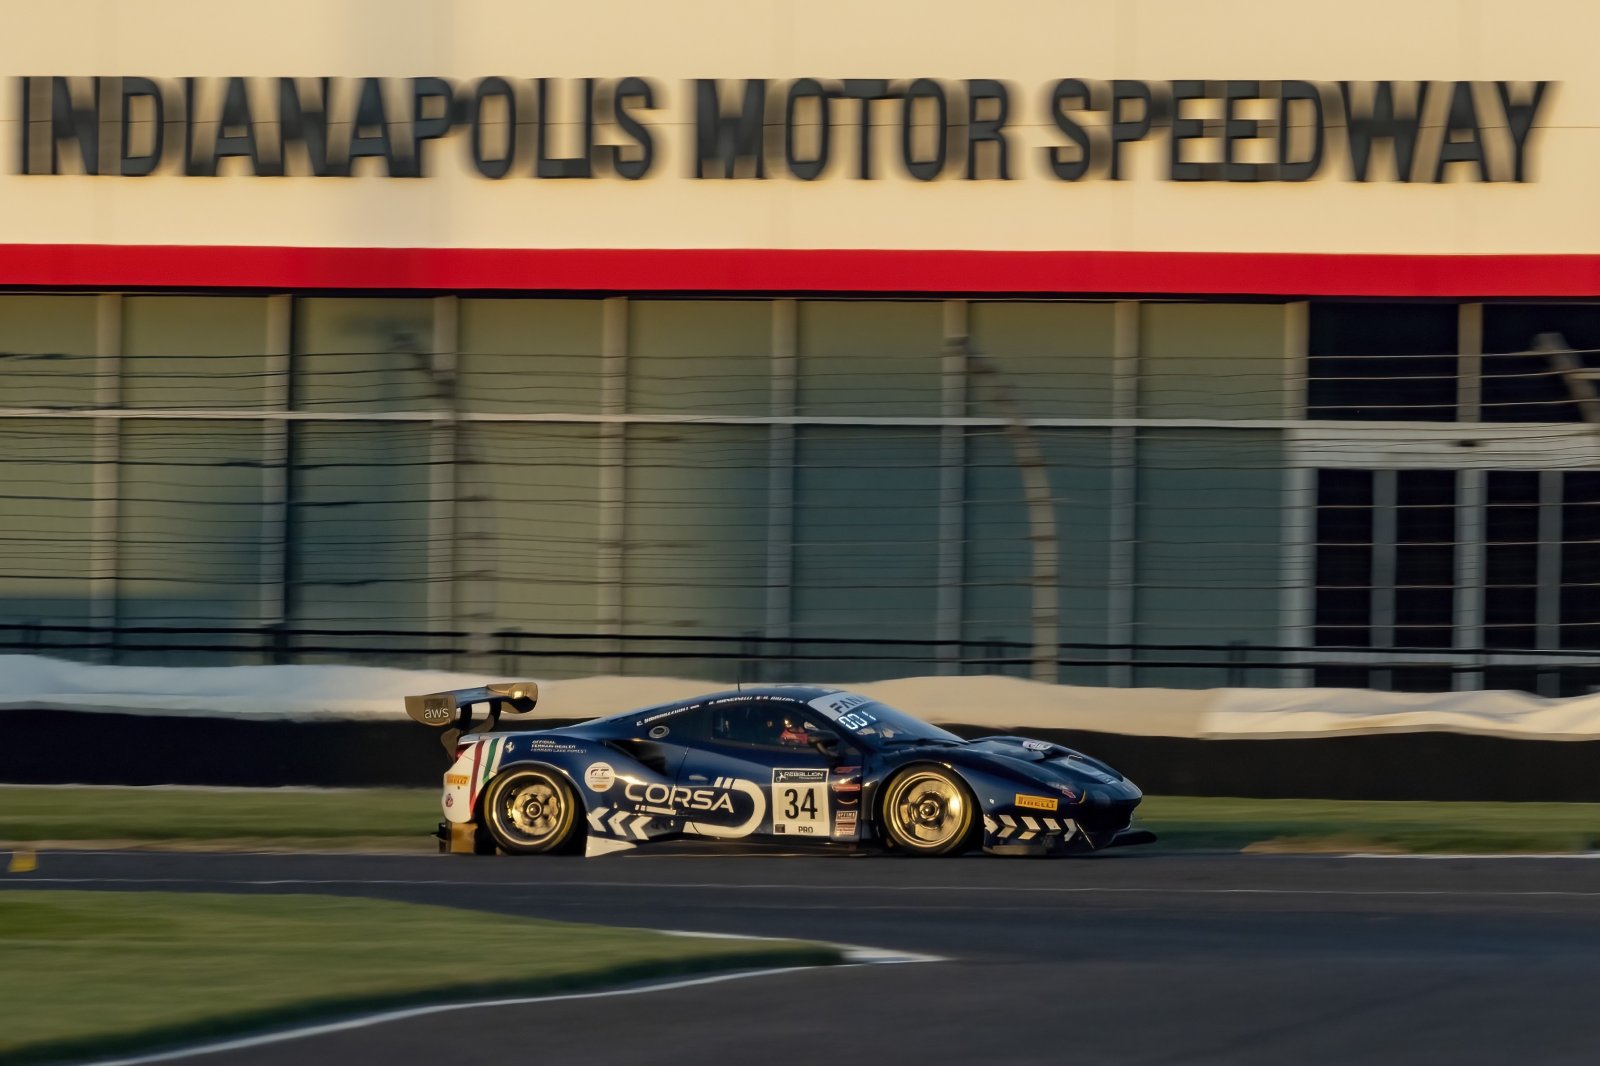 Conquest Racing Quickest in Free Practice at Indianapolis Motor Speedway, Wright Motorsports Tops the Pro-Am Charts